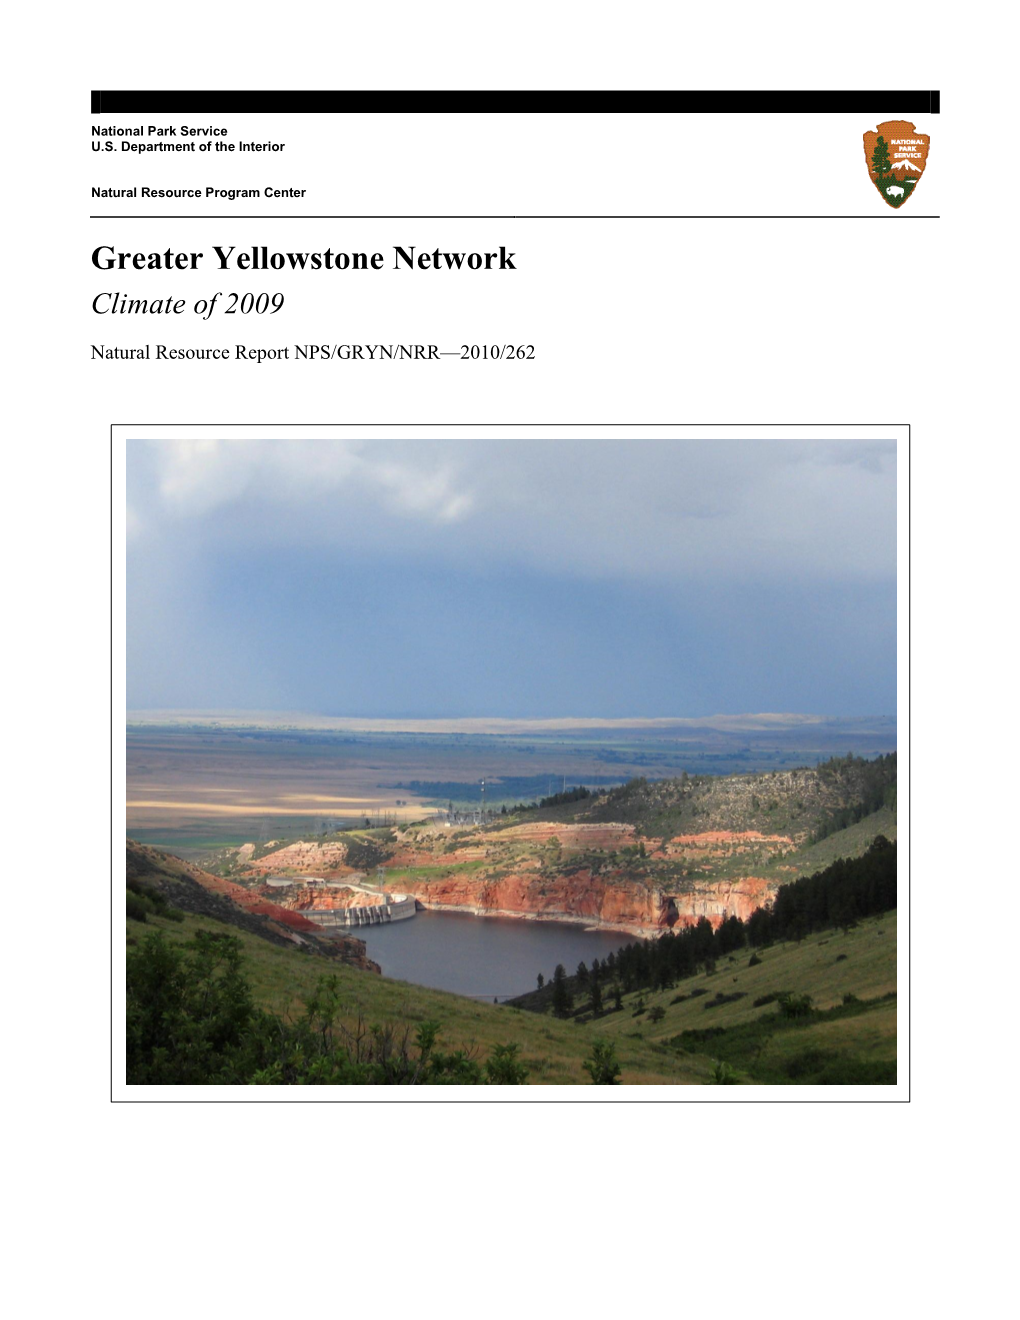 Greater Yellowstone Network Climate of 2009